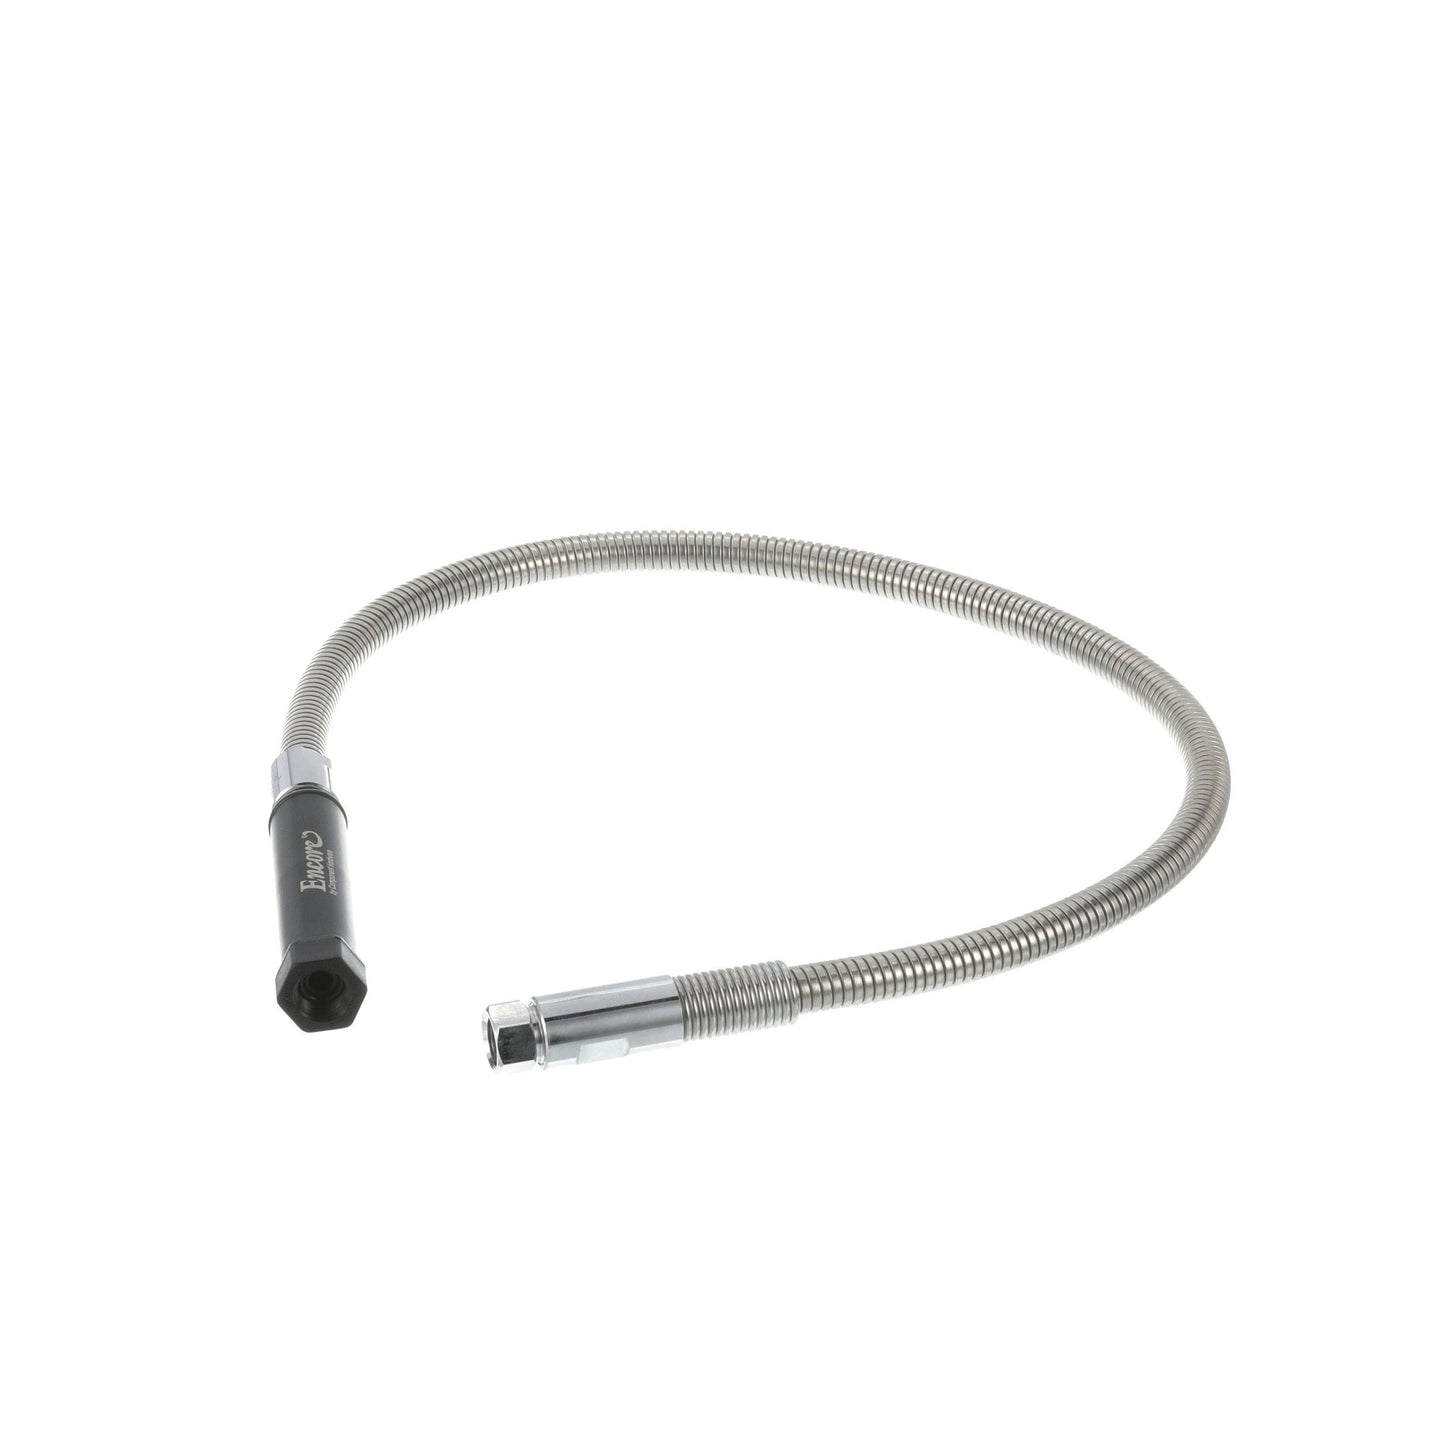 MM-KL50-Y004-44 Hose Assembly with Grip (44” LG)